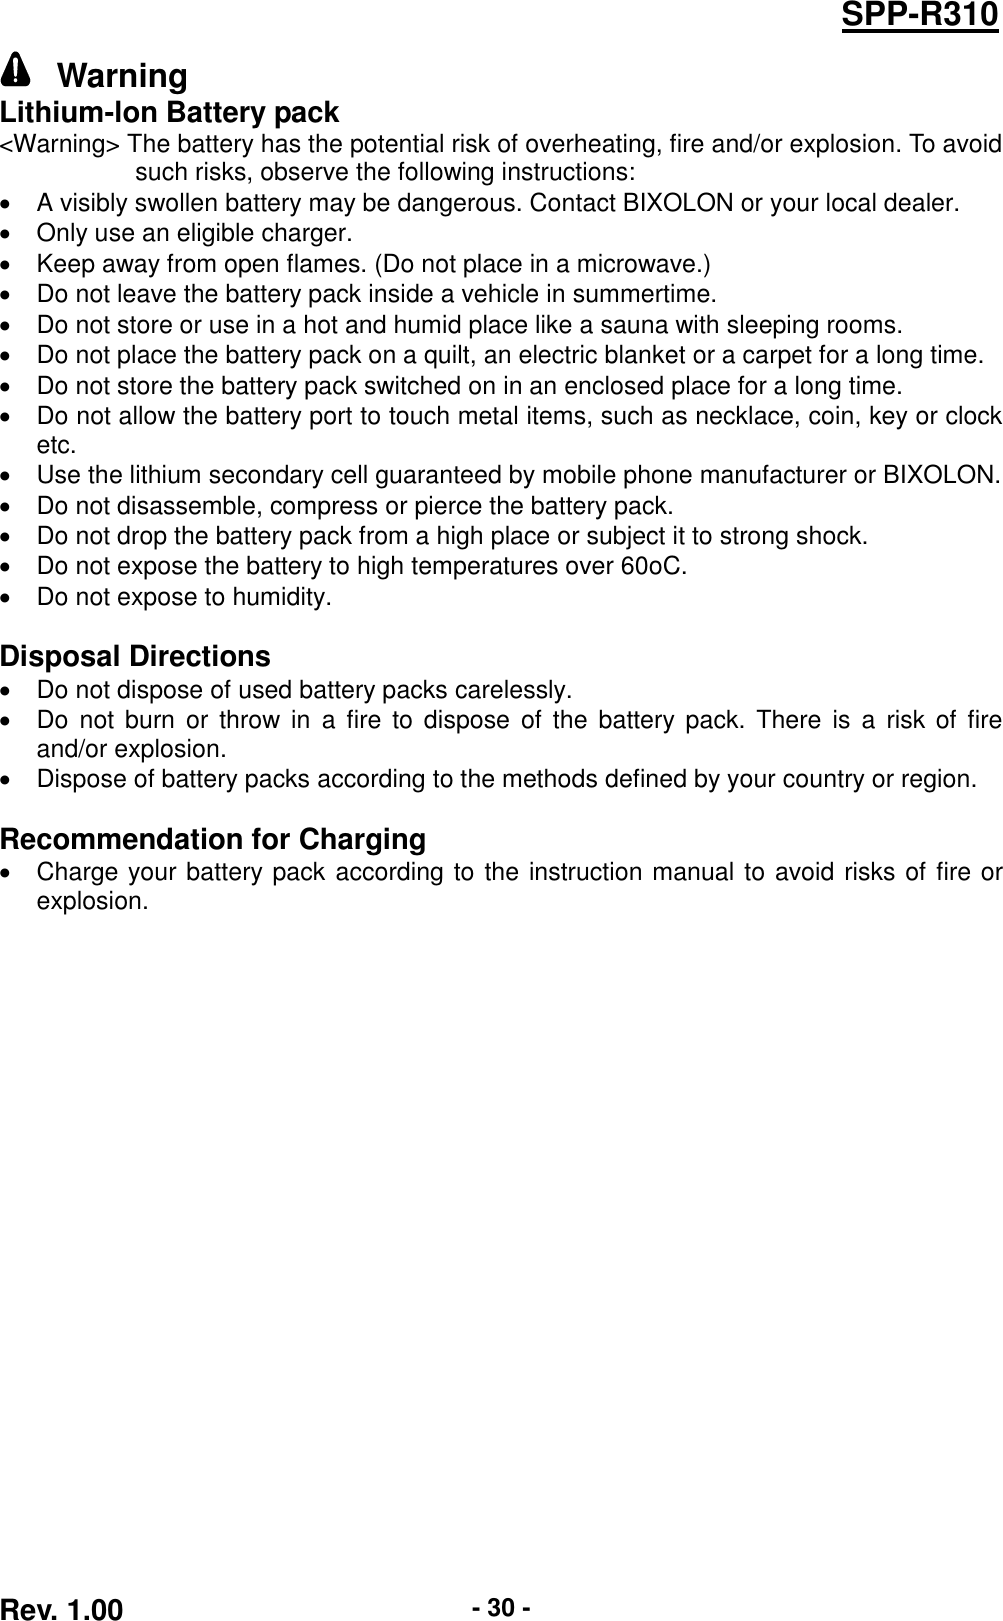  Rev. 1.00 - 30 - SPP-R310   Warning Lithium-lon Battery pack &lt;Warning&gt; The battery has the potential risk of overheating, fire and/or explosion. To avoid such risks, observe the following instructions:   A visibly swollen battery may be dangerous. Contact BIXOLON or your local dealer.   Only use an eligible charger.   Keep away from open flames. (Do not place in a microwave.)   Do not leave the battery pack inside a vehicle in summertime.   Do not store or use in a hot and humid place like a sauna with sleeping rooms.   Do not place the battery pack on a quilt, an electric blanket or a carpet for a long time.   Do not store the battery pack switched on in an enclosed place for a long time.   Do not allow the battery port to touch metal items, such as necklace, coin, key or clock etc.   Use the lithium secondary cell guaranteed by mobile phone manufacturer or BIXOLON.   Do not disassemble, compress or pierce the battery pack.   Do not drop the battery pack from a high place or subject it to strong shock.   Do not expose the battery to high temperatures over 60oC.   Do not expose to humidity.  Disposal Directions   Do not dispose of used battery packs carelessly.   Do  not burn or  throw in  a fire  to dispose  of  the battery  pack. There  is  a  risk of  fire and/or explosion.   Dispose of battery packs according to the methods defined by your country or region.  Recommendation for Charging   Charge your battery pack according to the instruction manual to avoid risks of fire or explosion.  